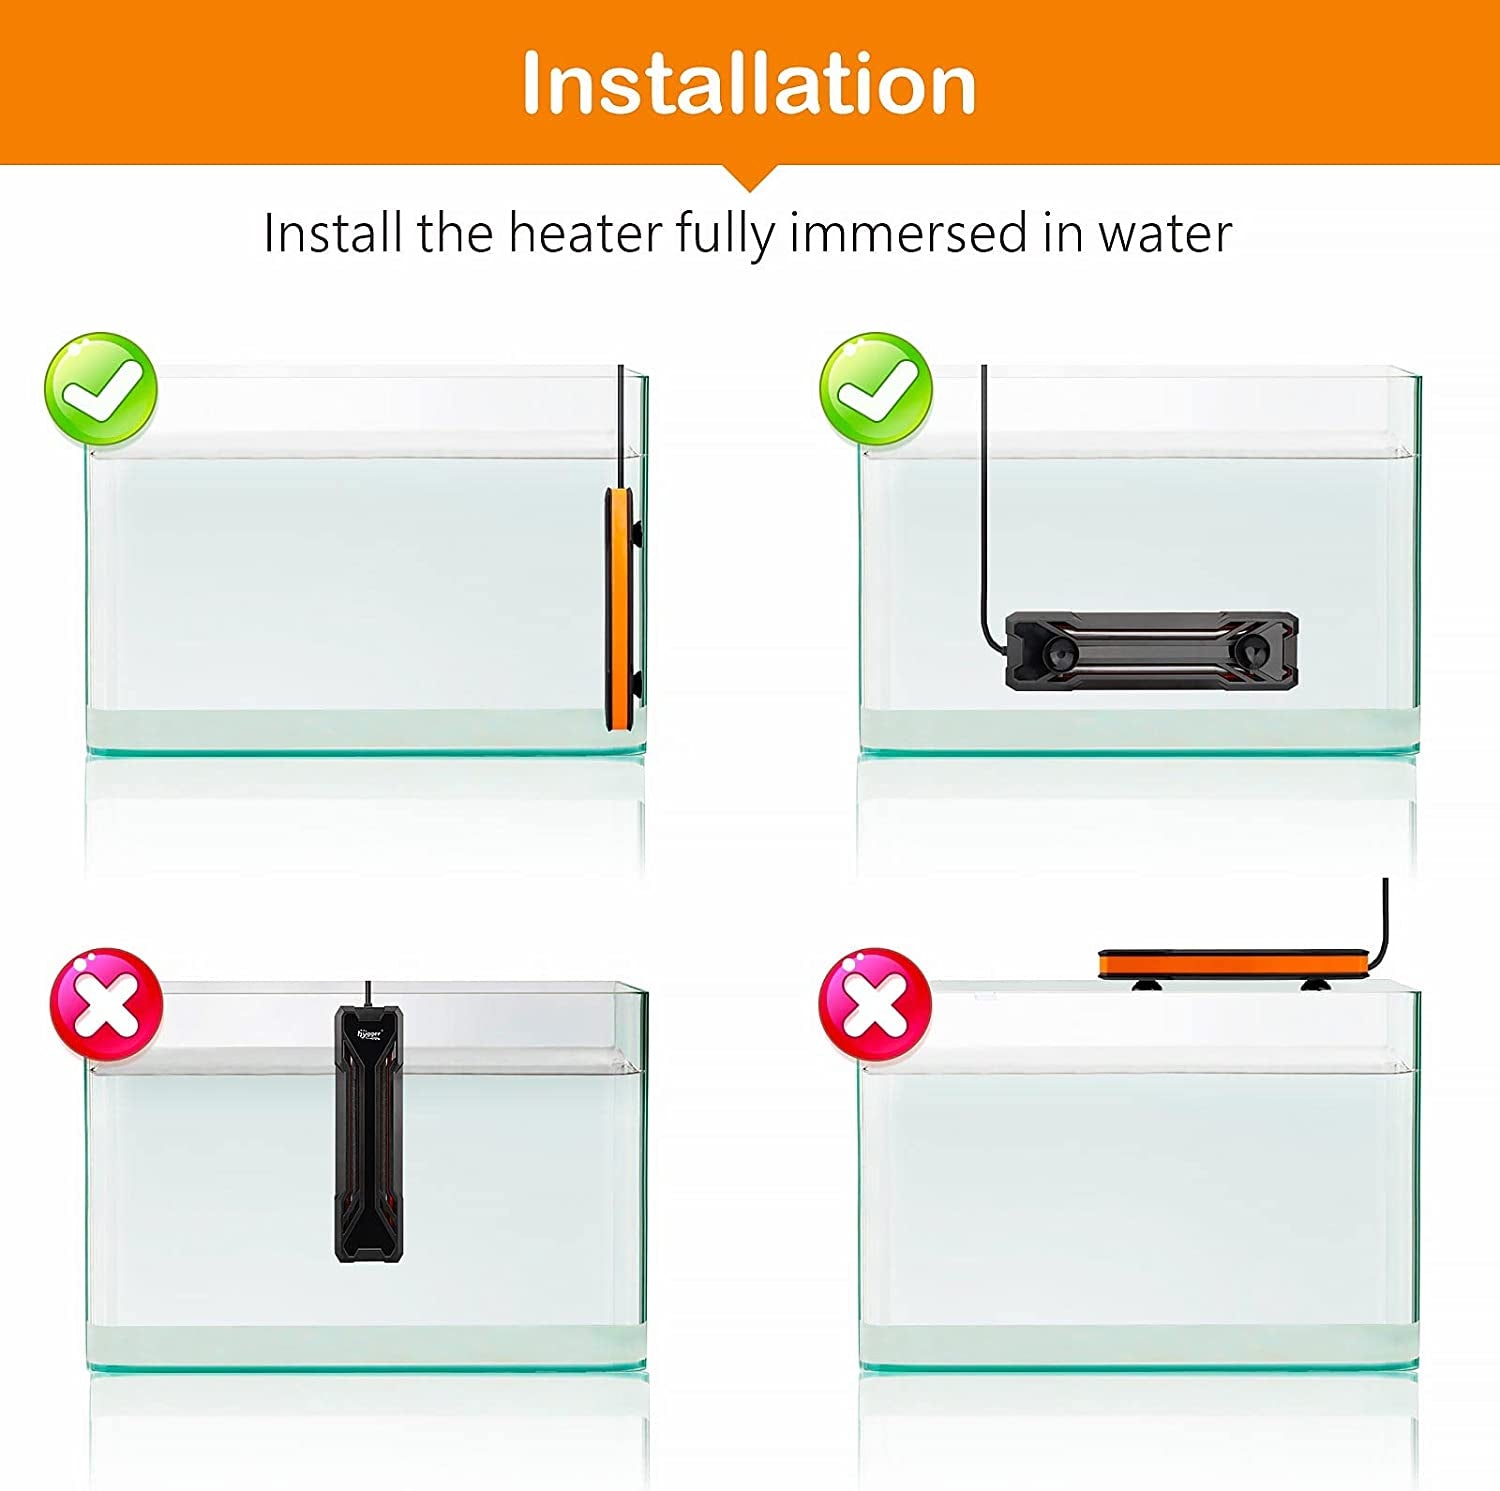 Aquarium Heater 300W/500W/800W/1000W, Submersible Fish Tank Heater with Digital LED Controller and Intelligent Leaving Water Automatically Stop Heating System, for Freshwater and Saltwater